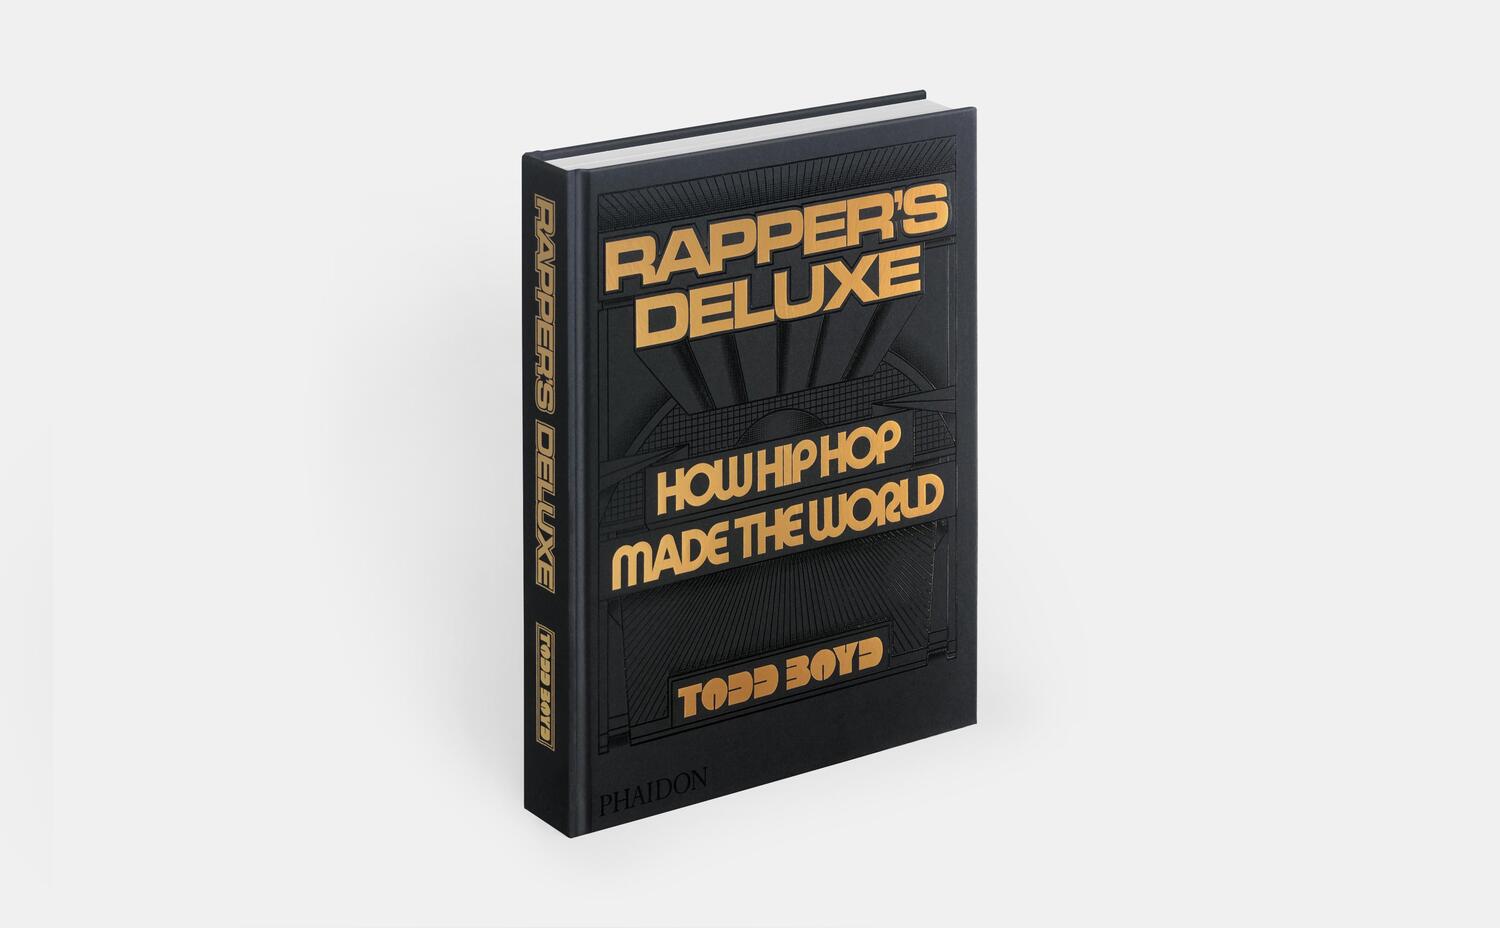 Bild: 9781838666224 | Rapper's Deluxe | How Hip Hop Made The World | Todd Boyd | Buch | 2024